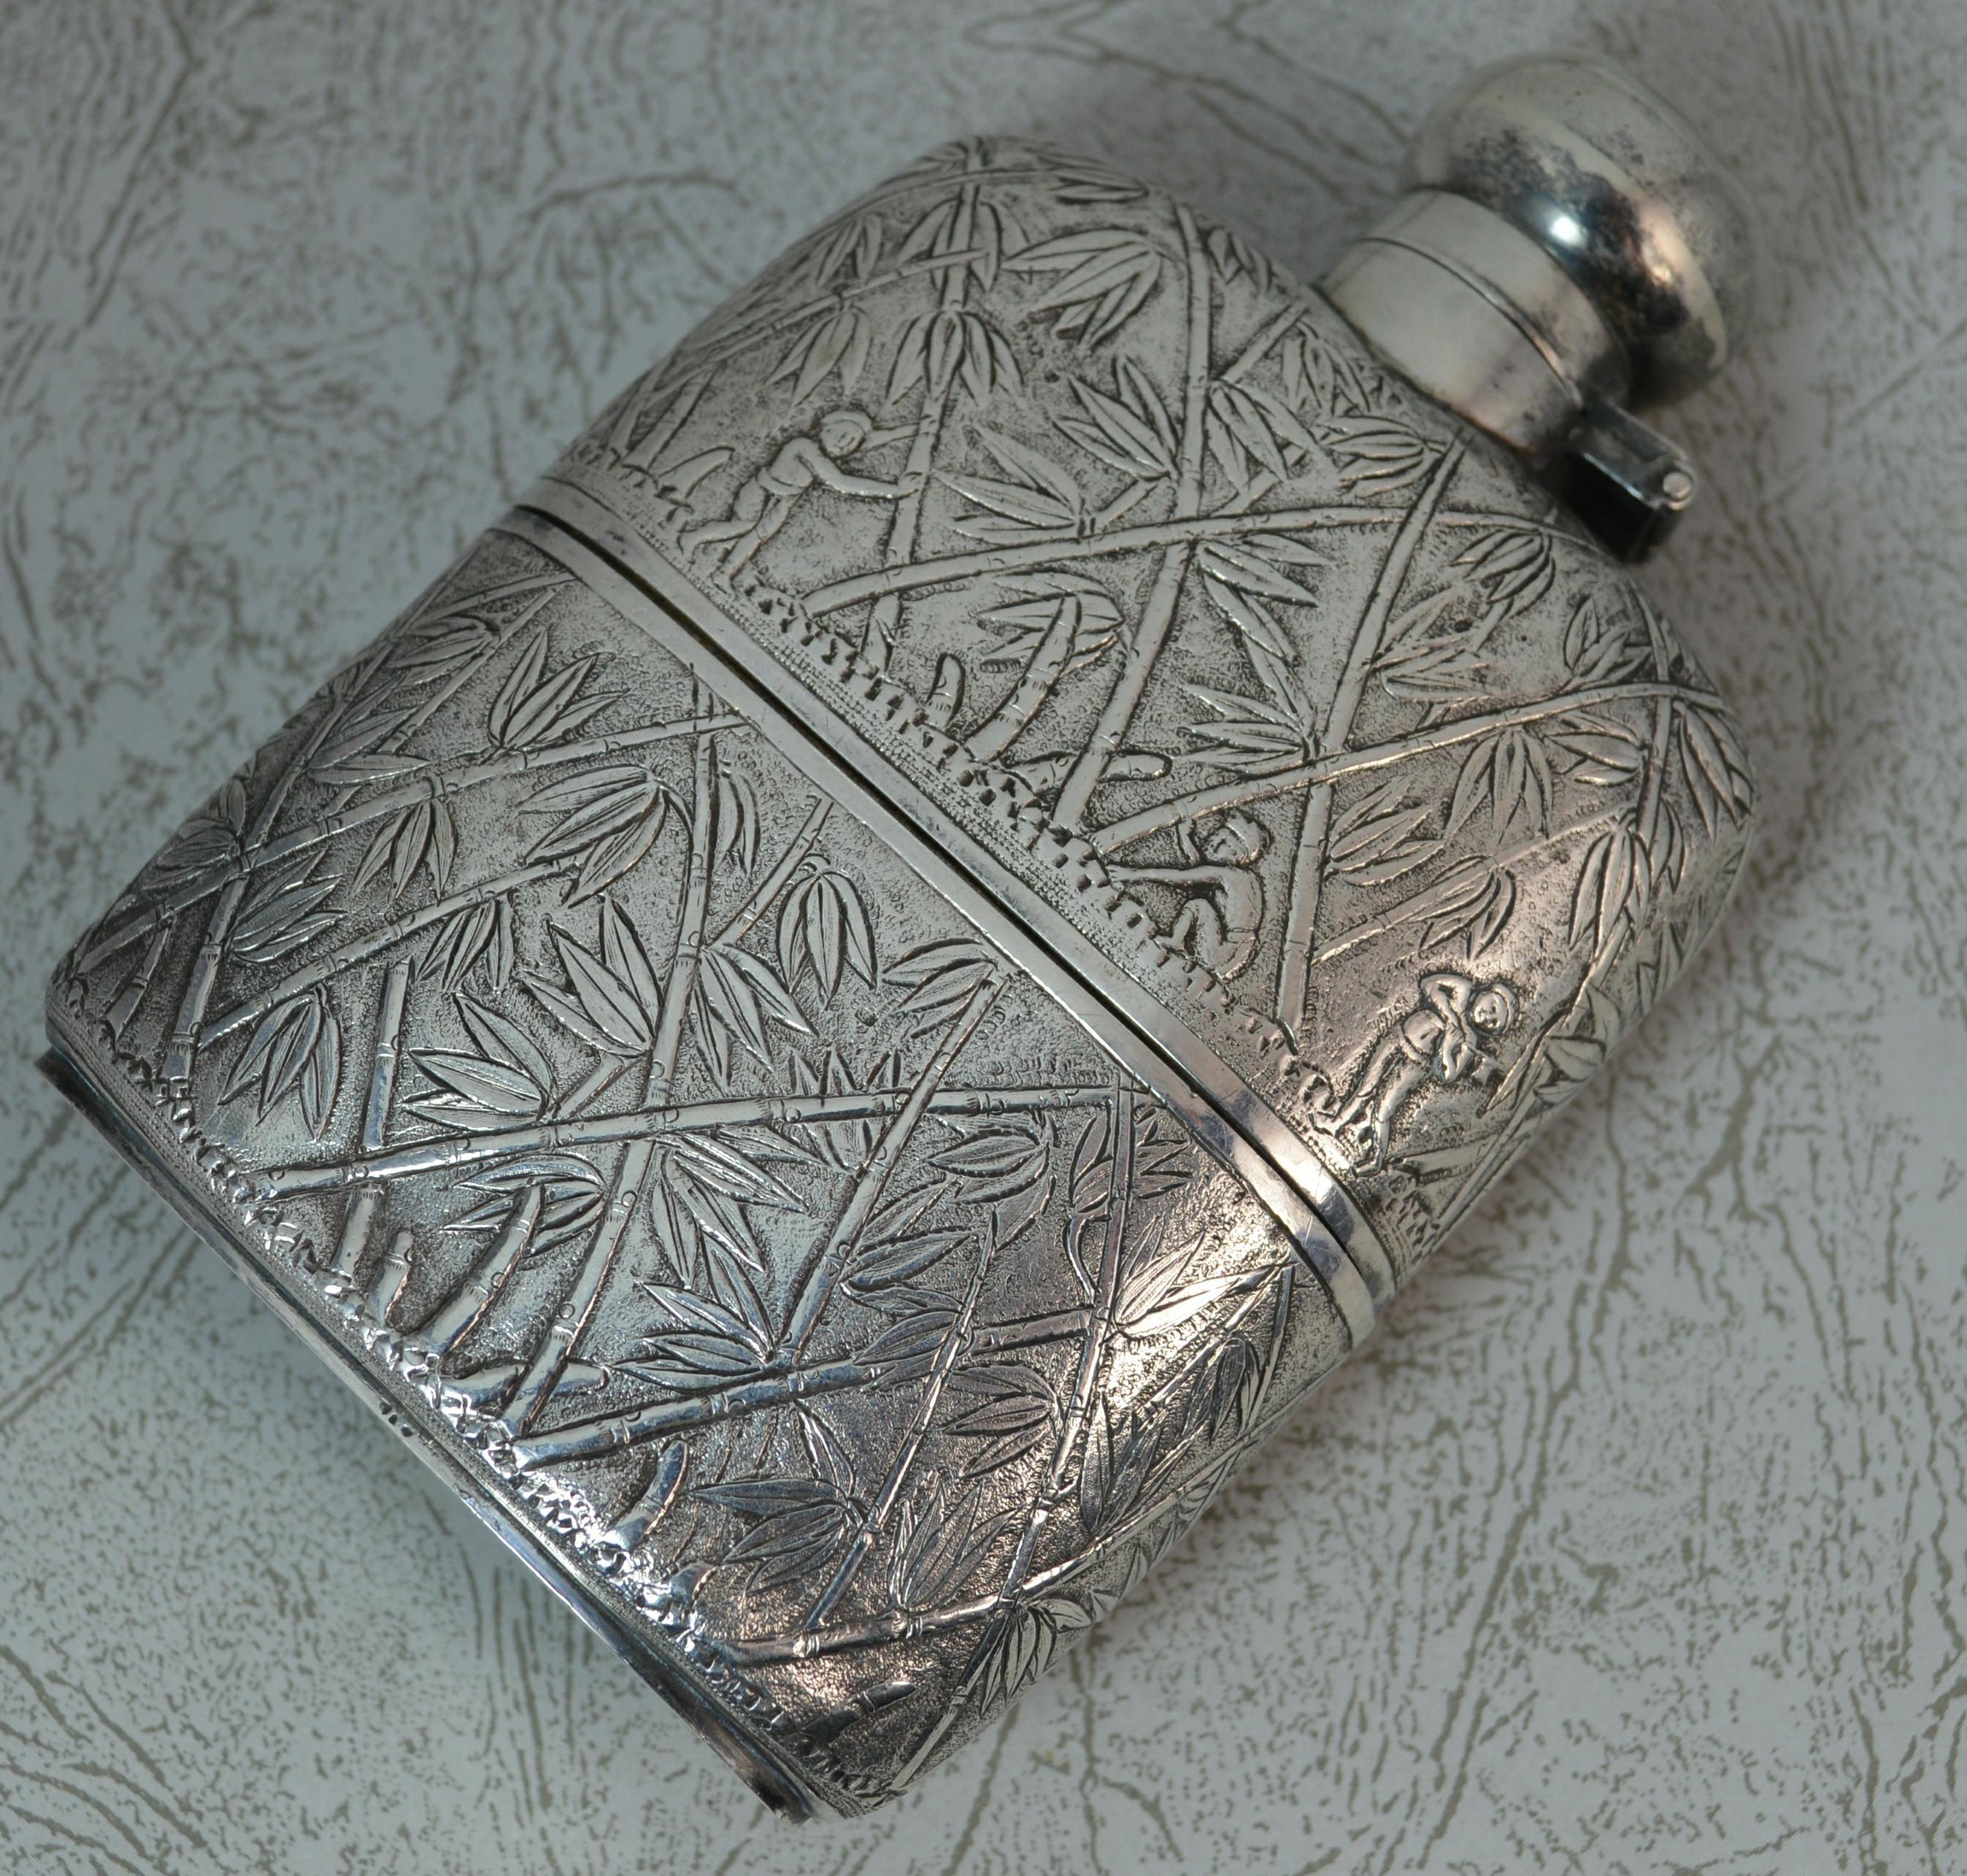 A very fine example of a solid silver hipflask.
True antique example, circa 1900. Most likely Japanese.
A fine bamboo design throughout. The base pulls off forming a stirrup cup.

Hallmarks ; no visible marks, fully tested
Size ; 7.5cm x 11.8cm